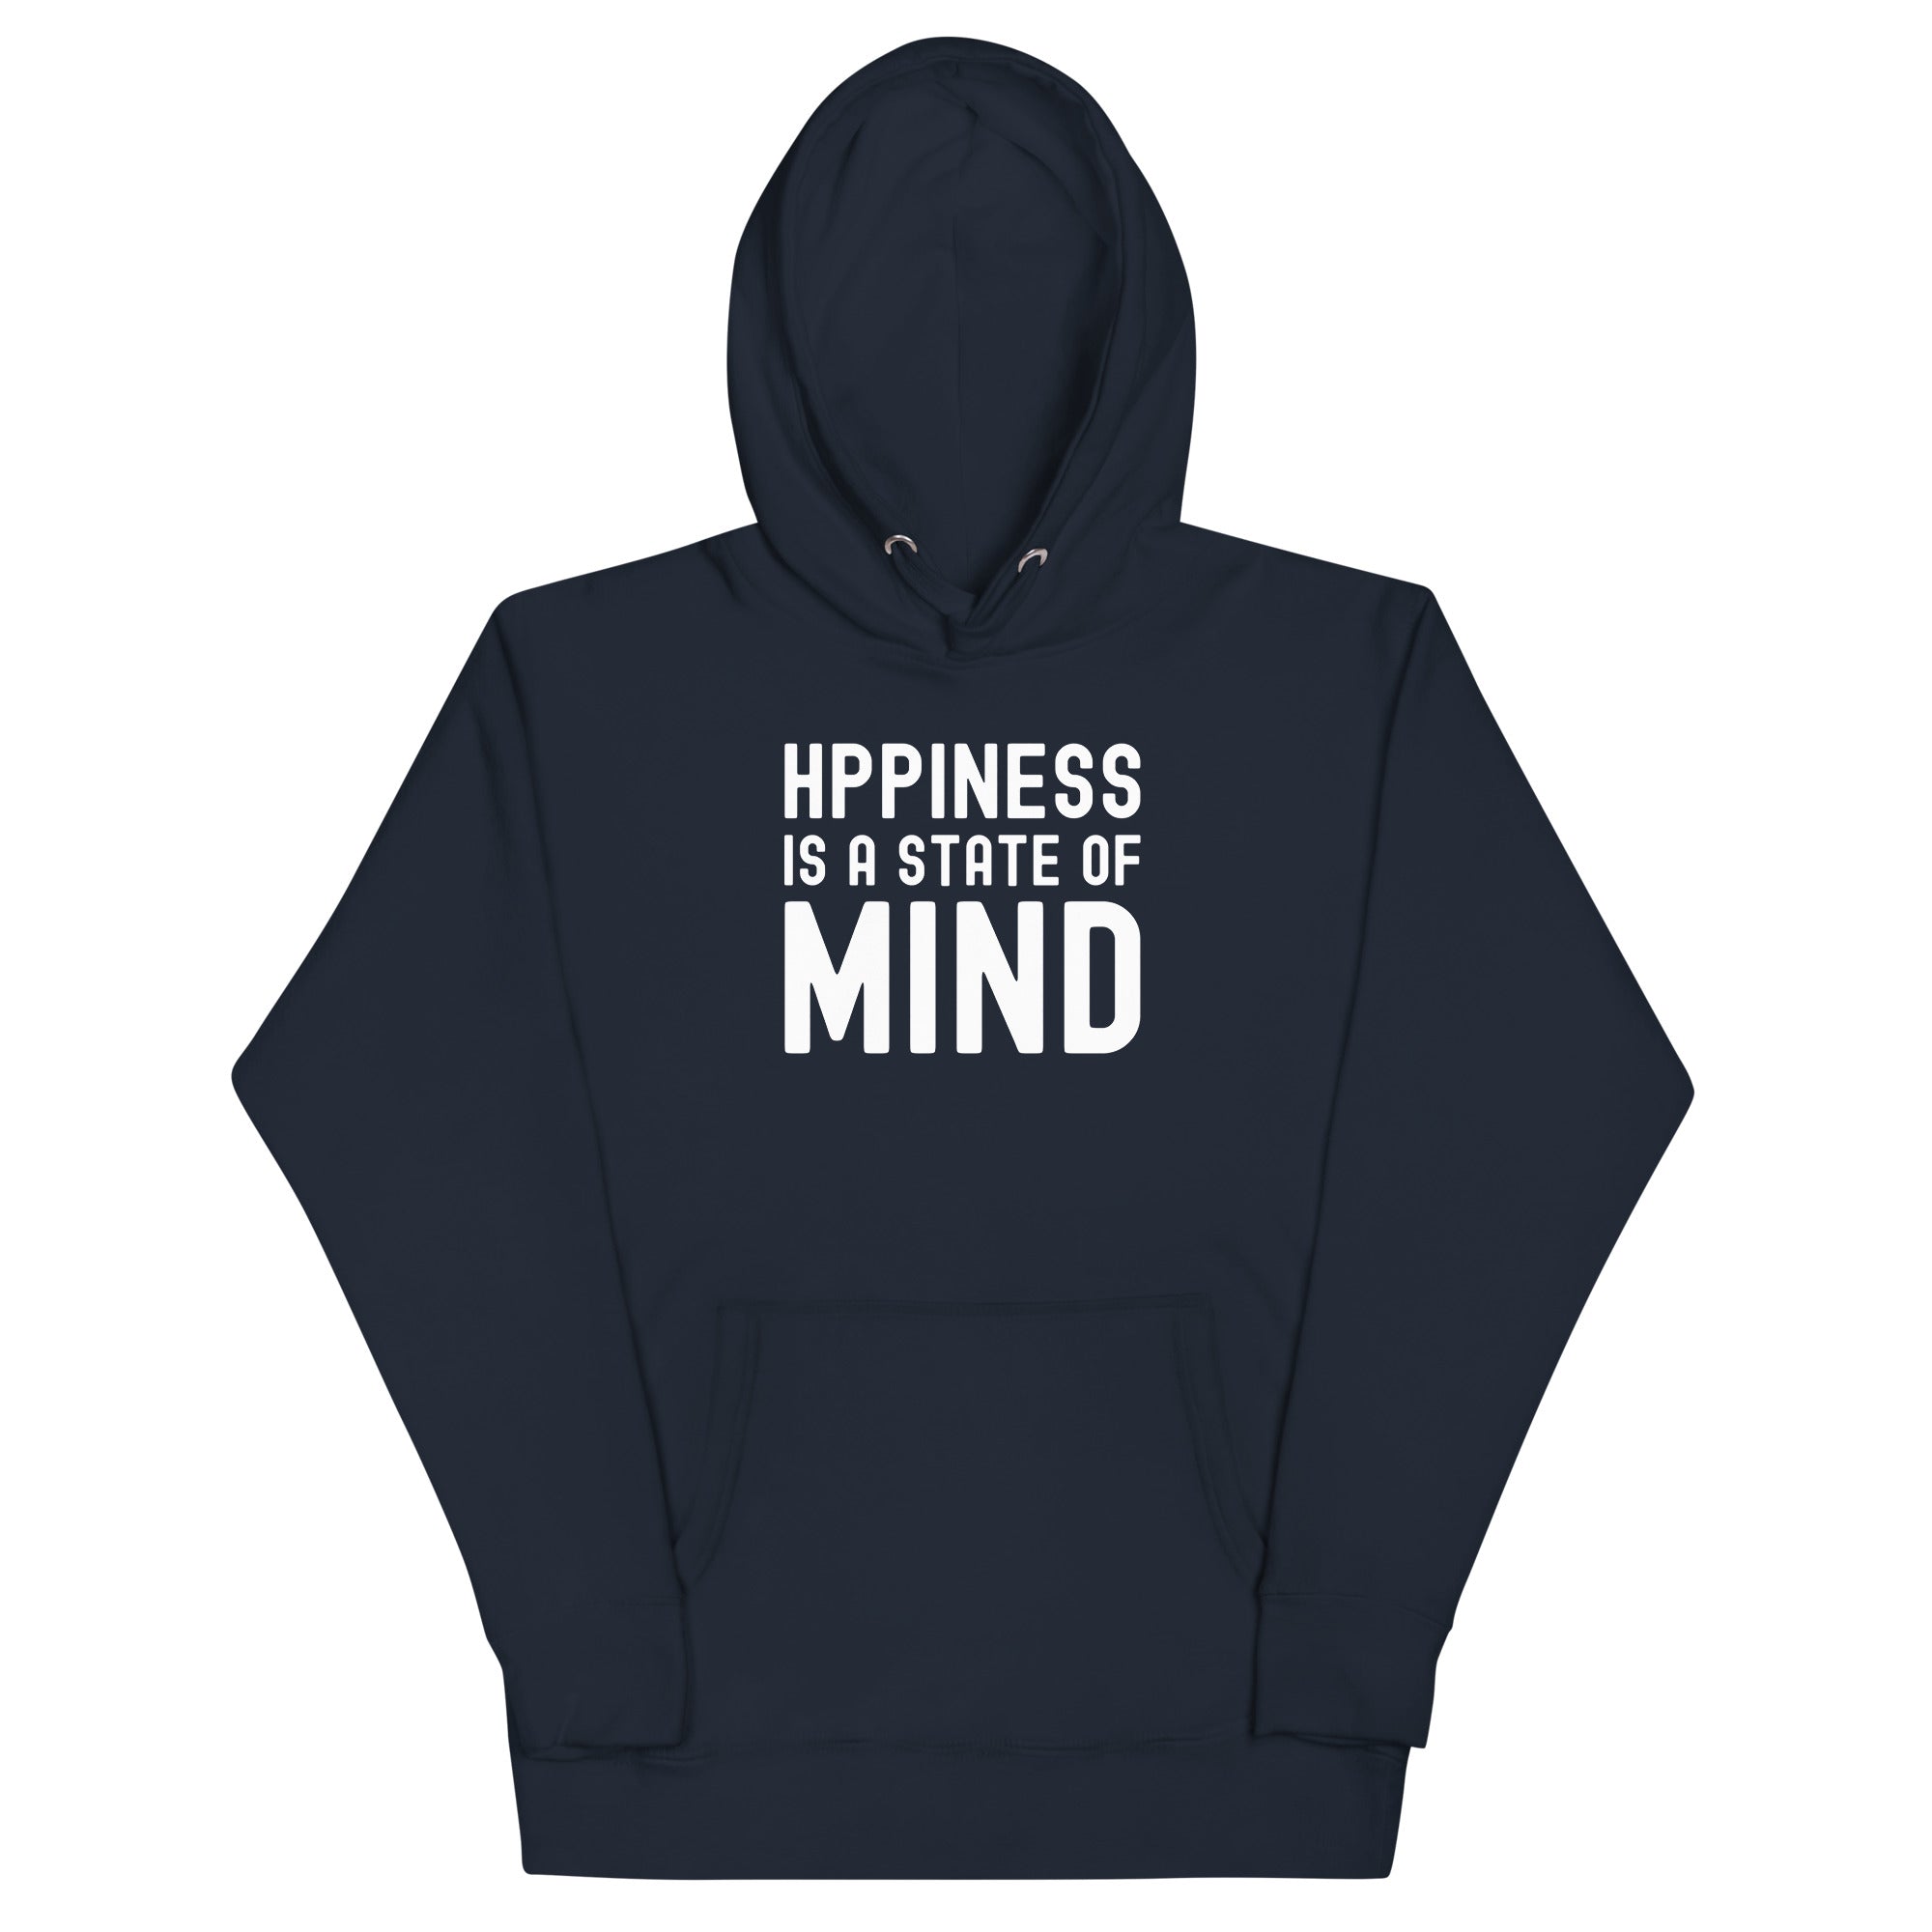 Unisex Hoodie | Hppiness is a state of mind